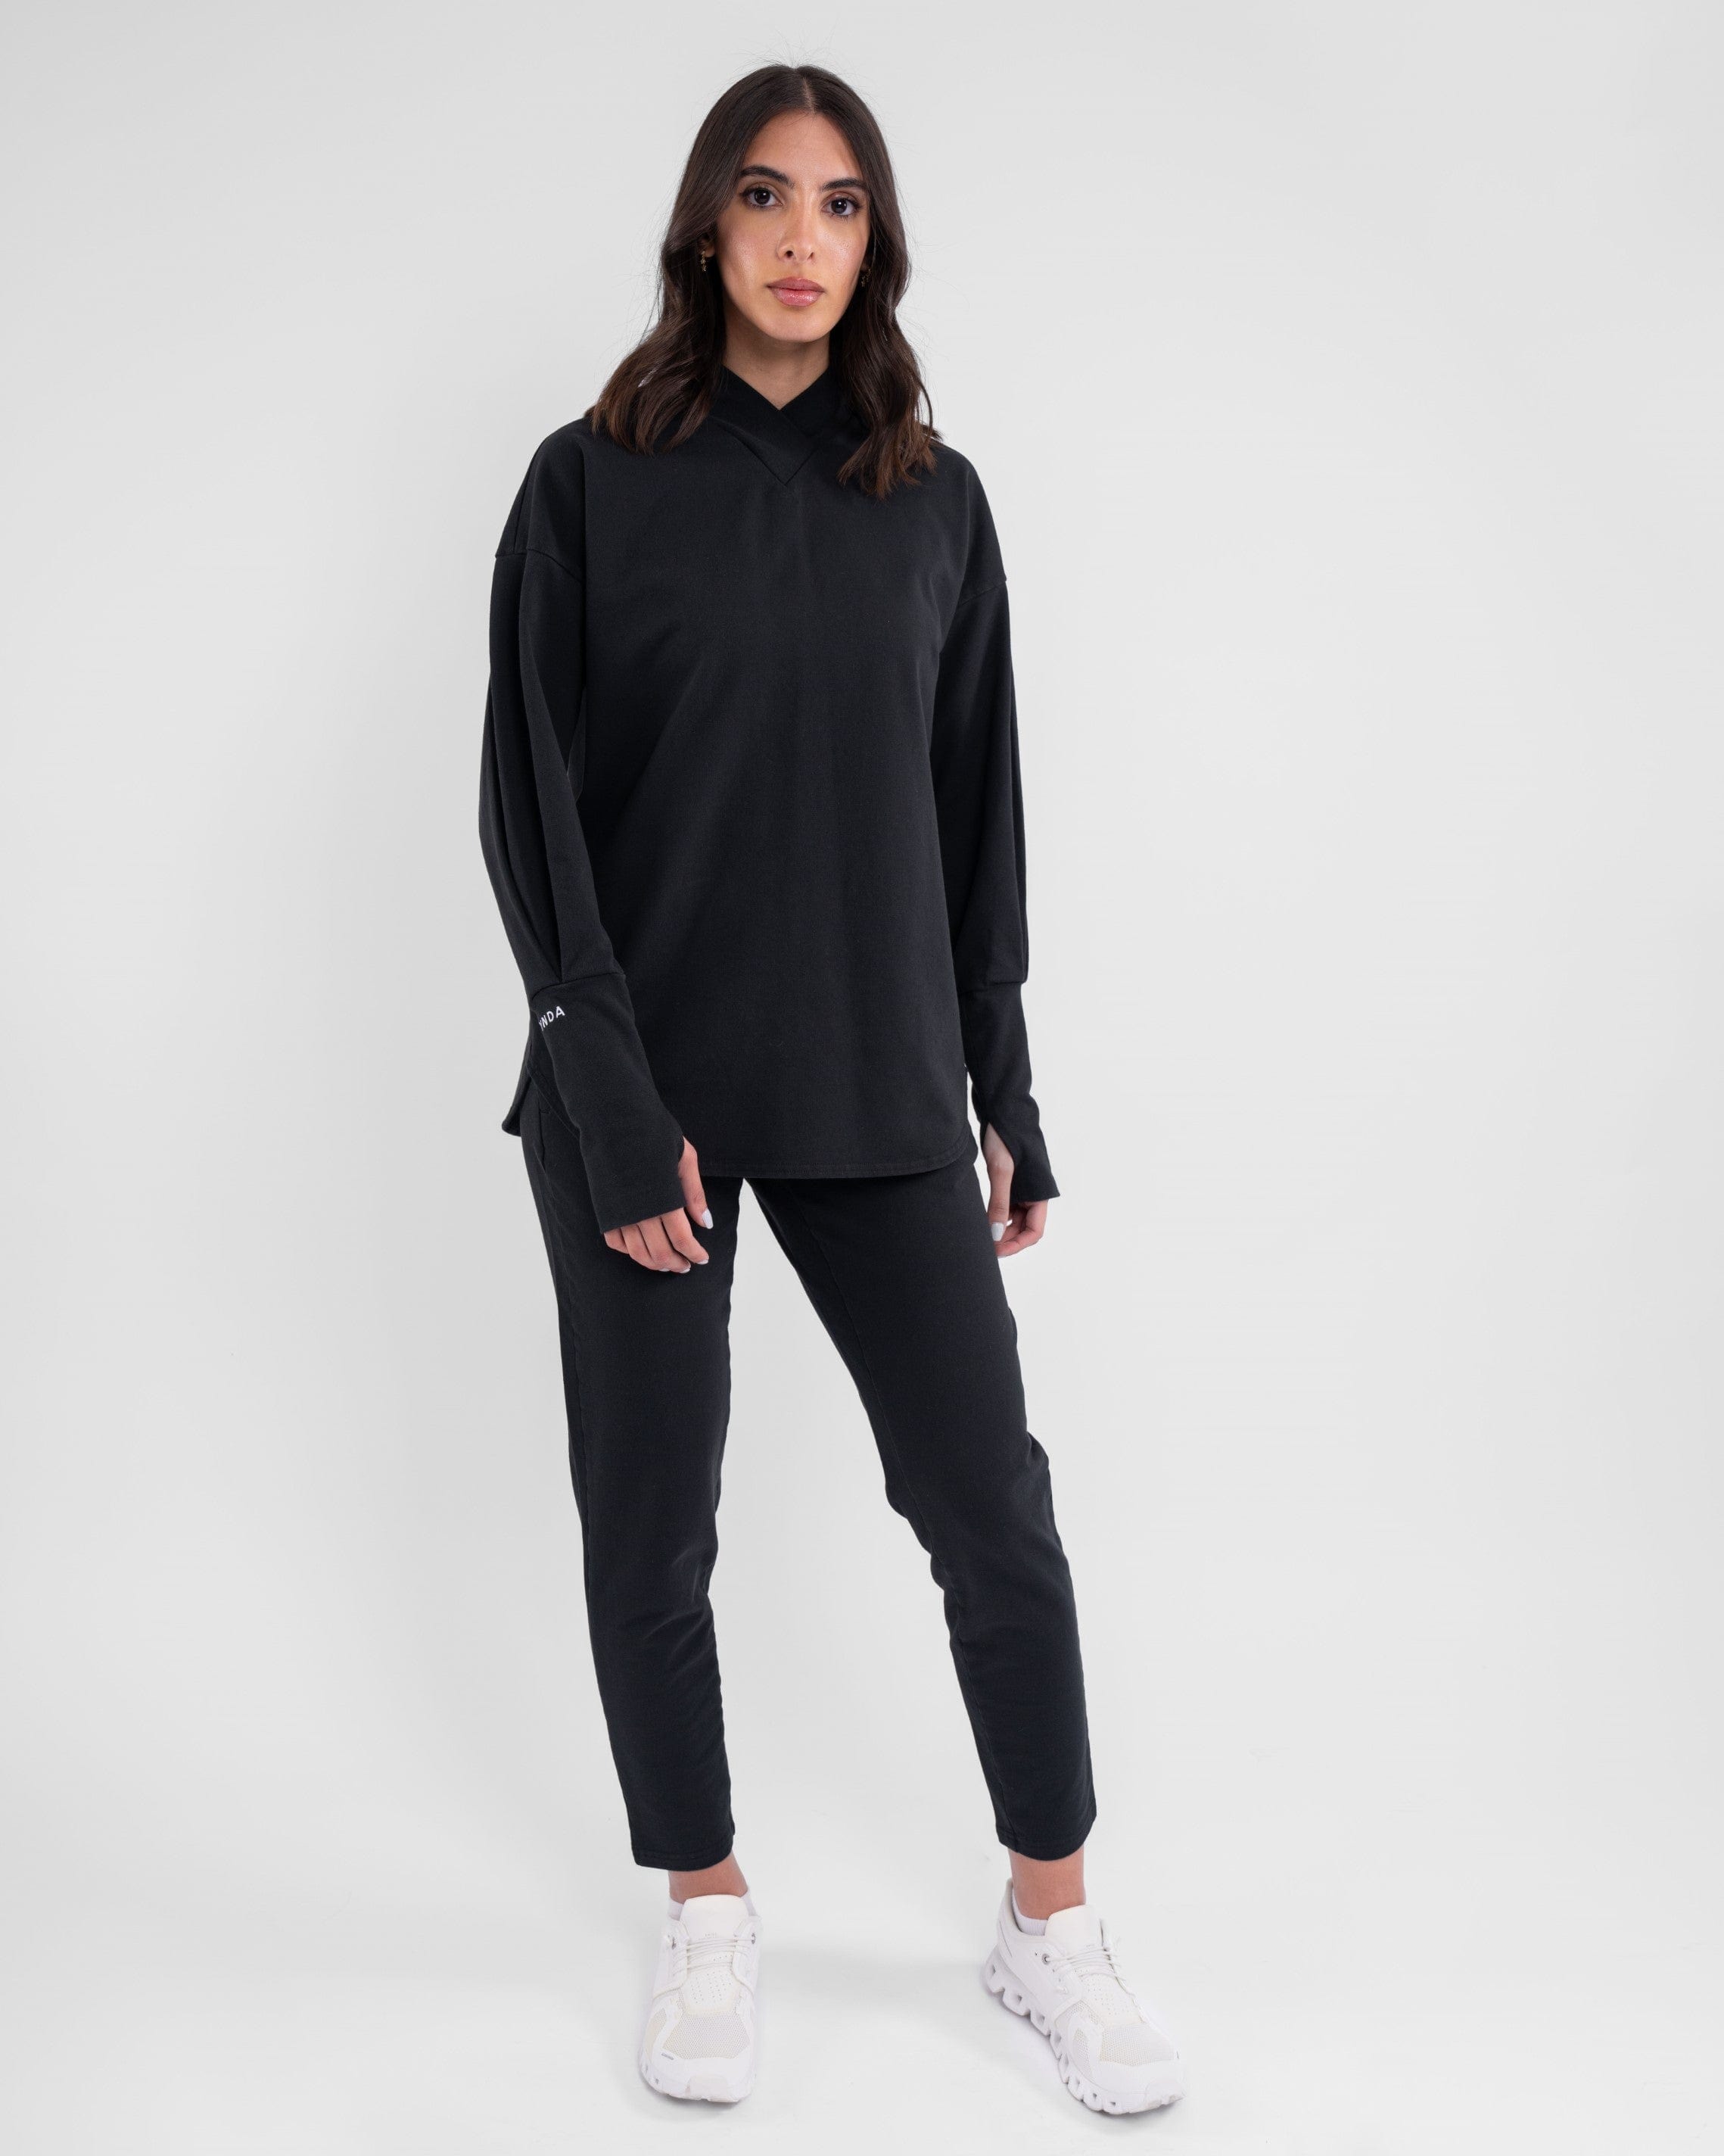 A woman stands confidently modeling a modest athletic CANTARA PANTS consisting of a long-sleeve shirt and slim pants, both made from moisture-wicking cotton terry loop fabric, complemented by a pair of white shoes.